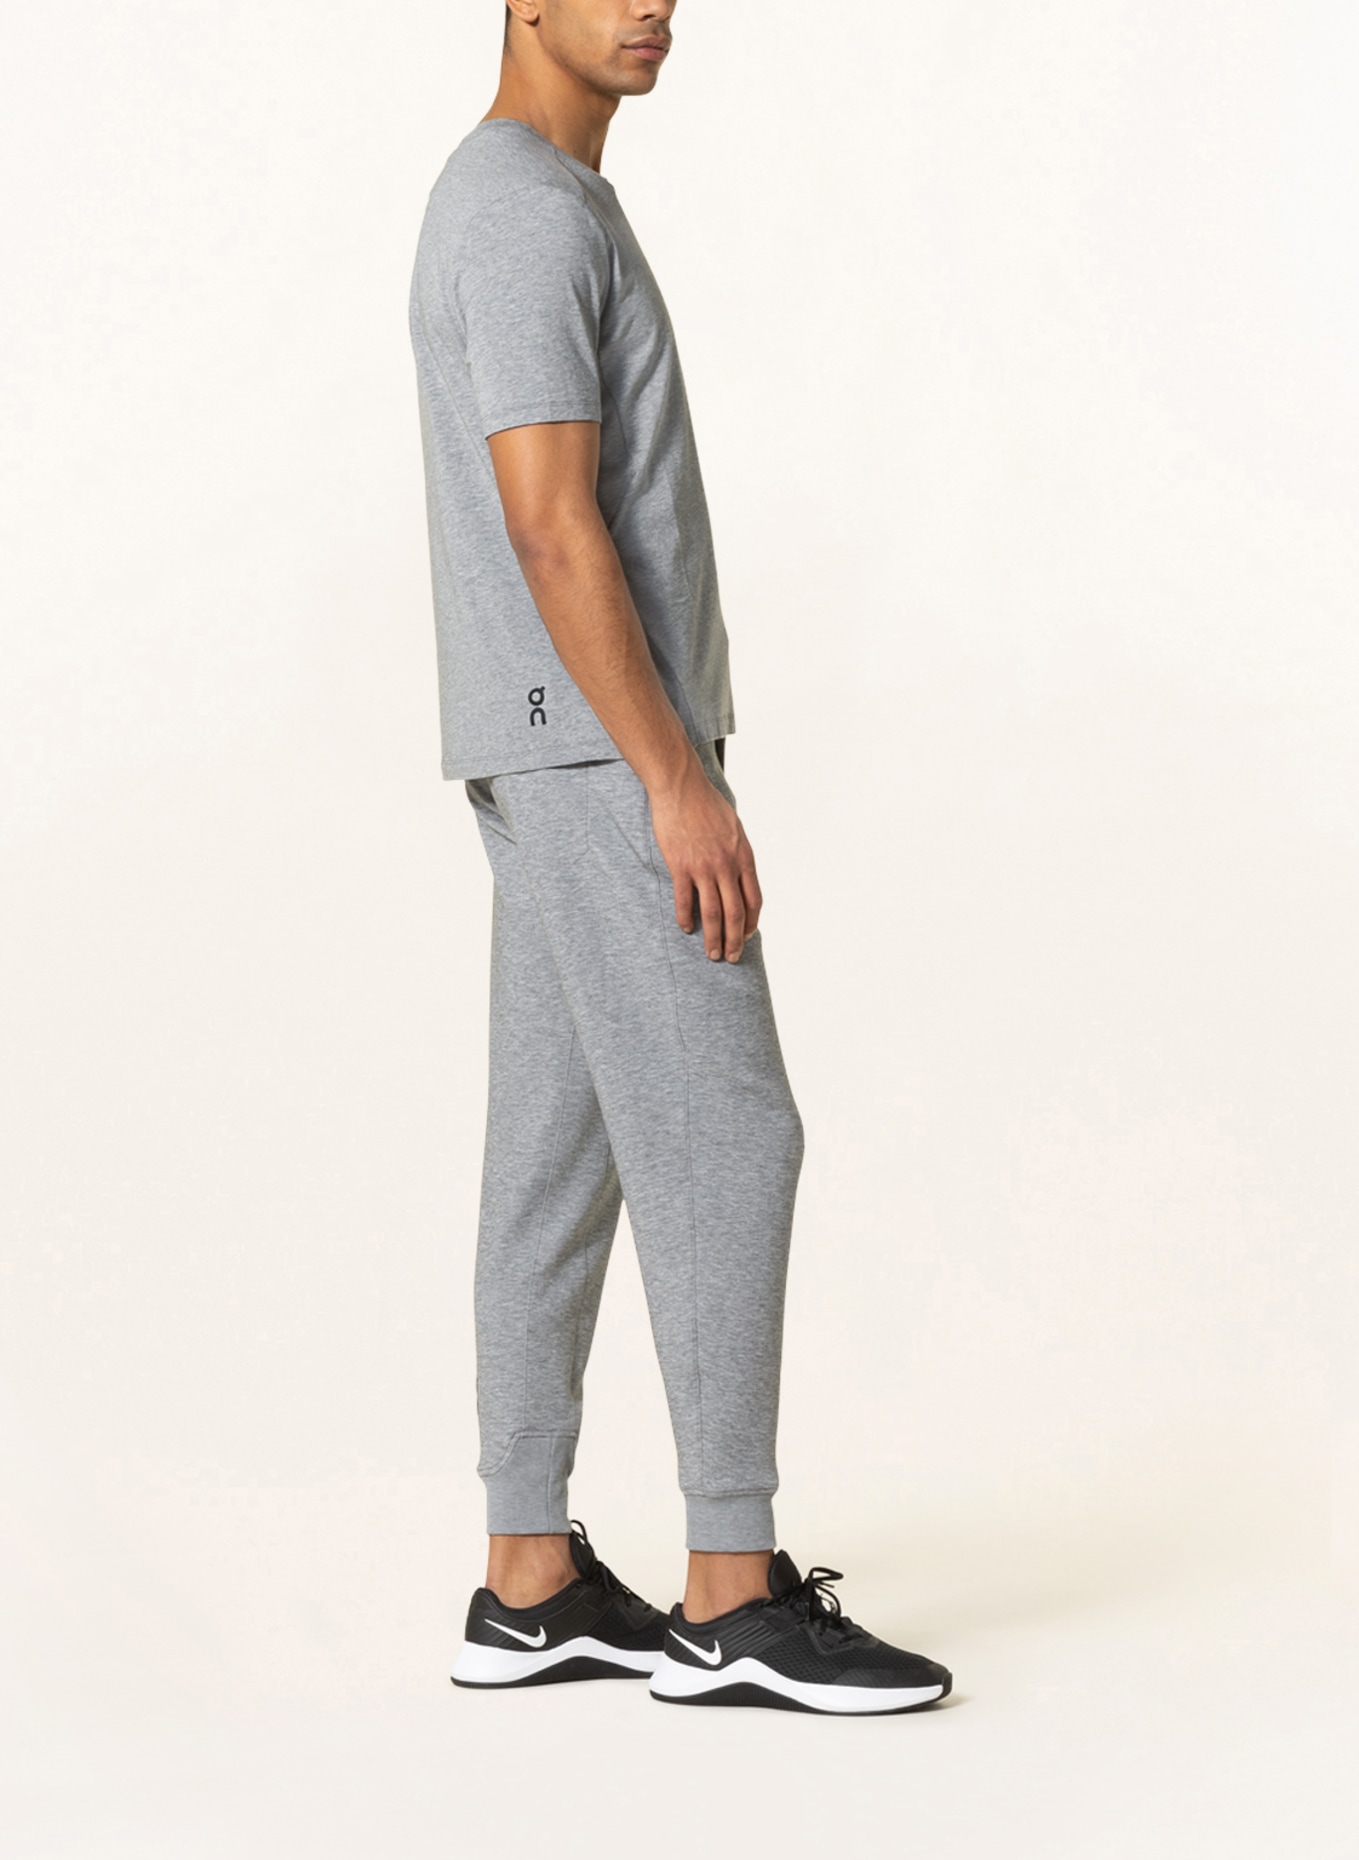 On Sweatpants in gray